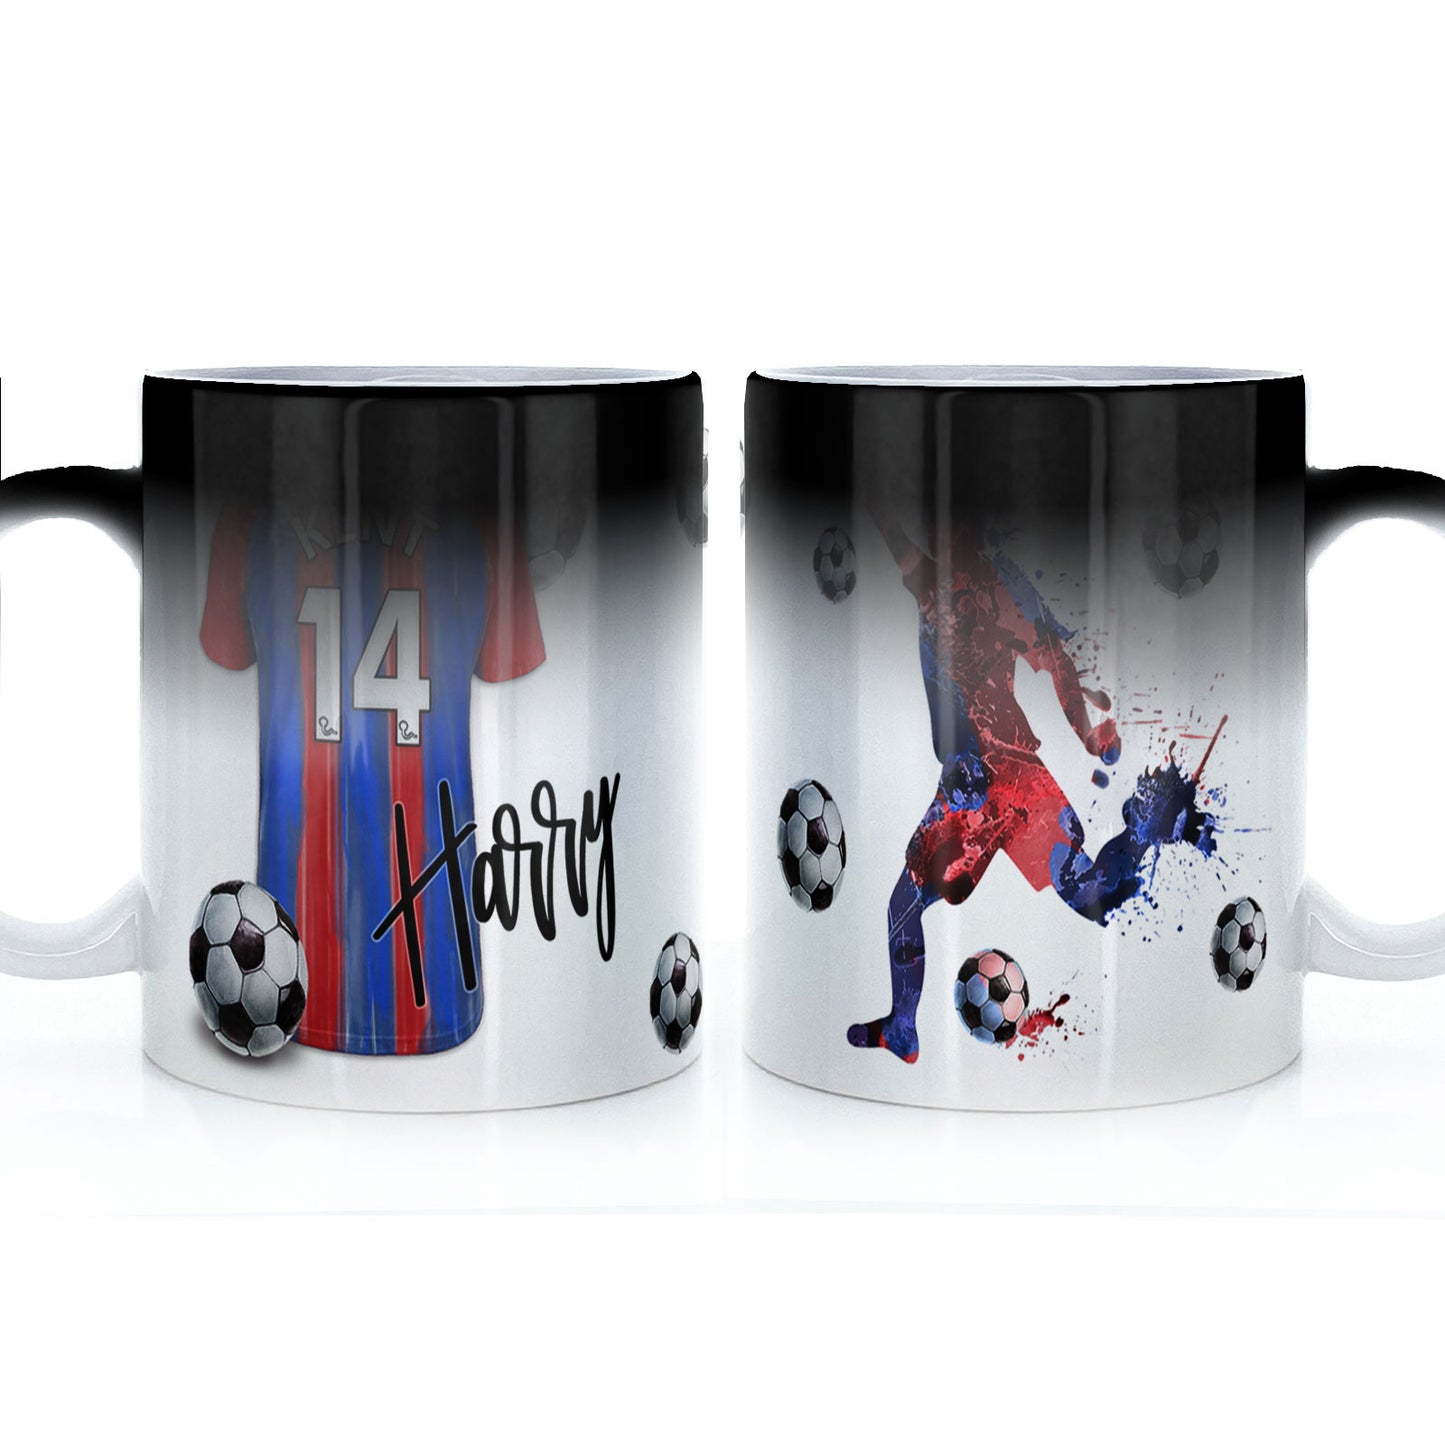 Personalised Mug with Stylish Text and Red & Blue Striped Shirt with Name & Number